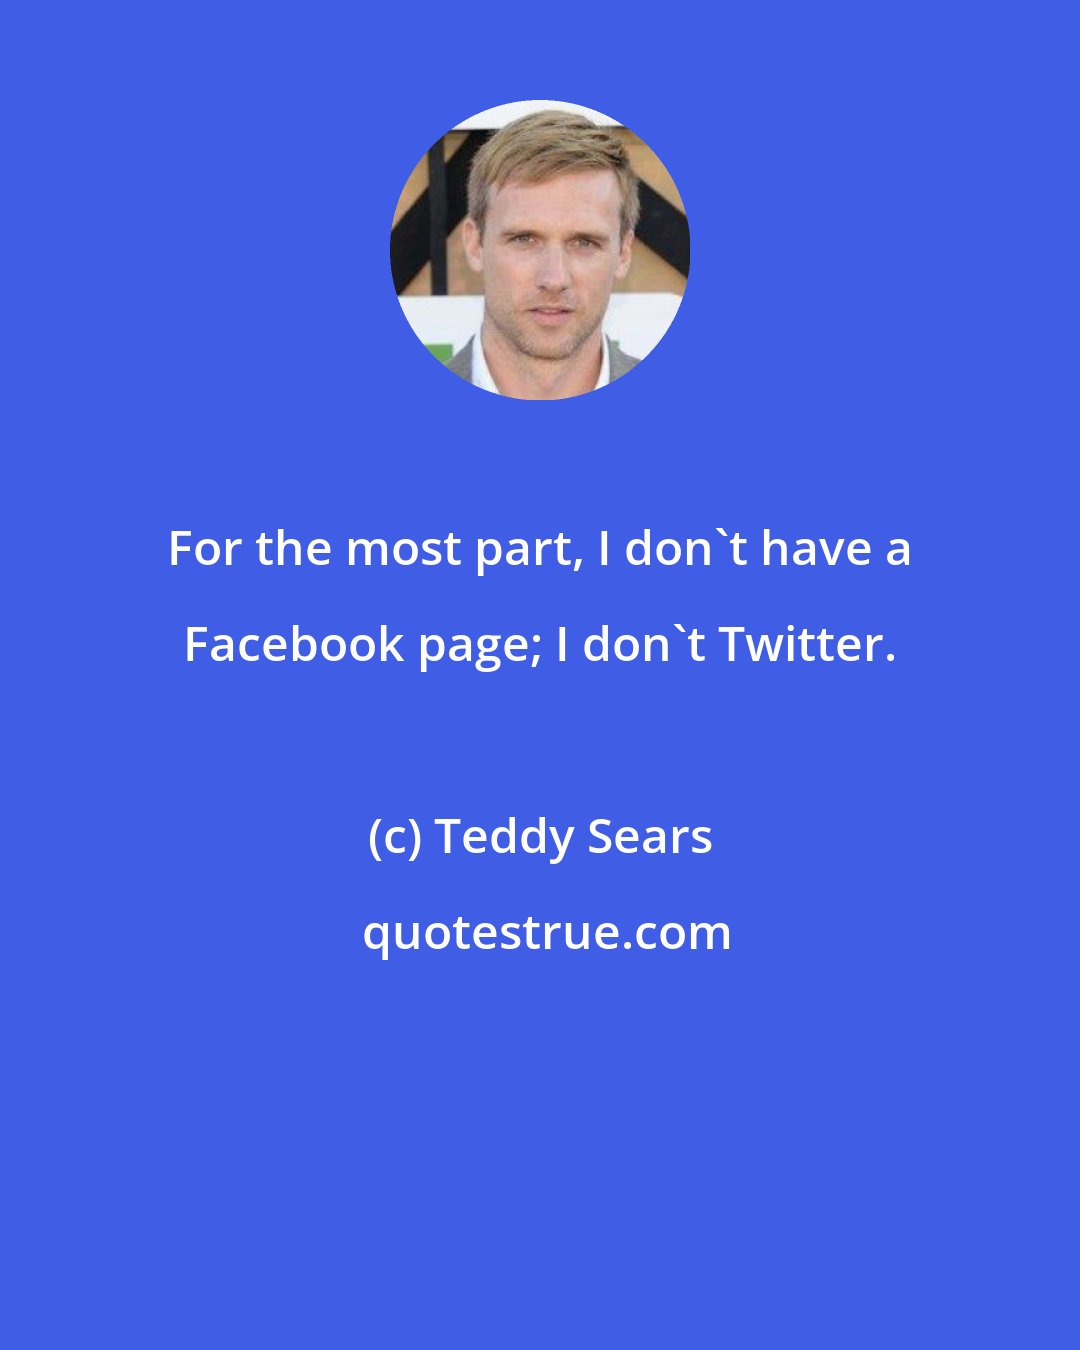 Teddy Sears: For the most part, I don't have a Facebook page; I don't Twitter.